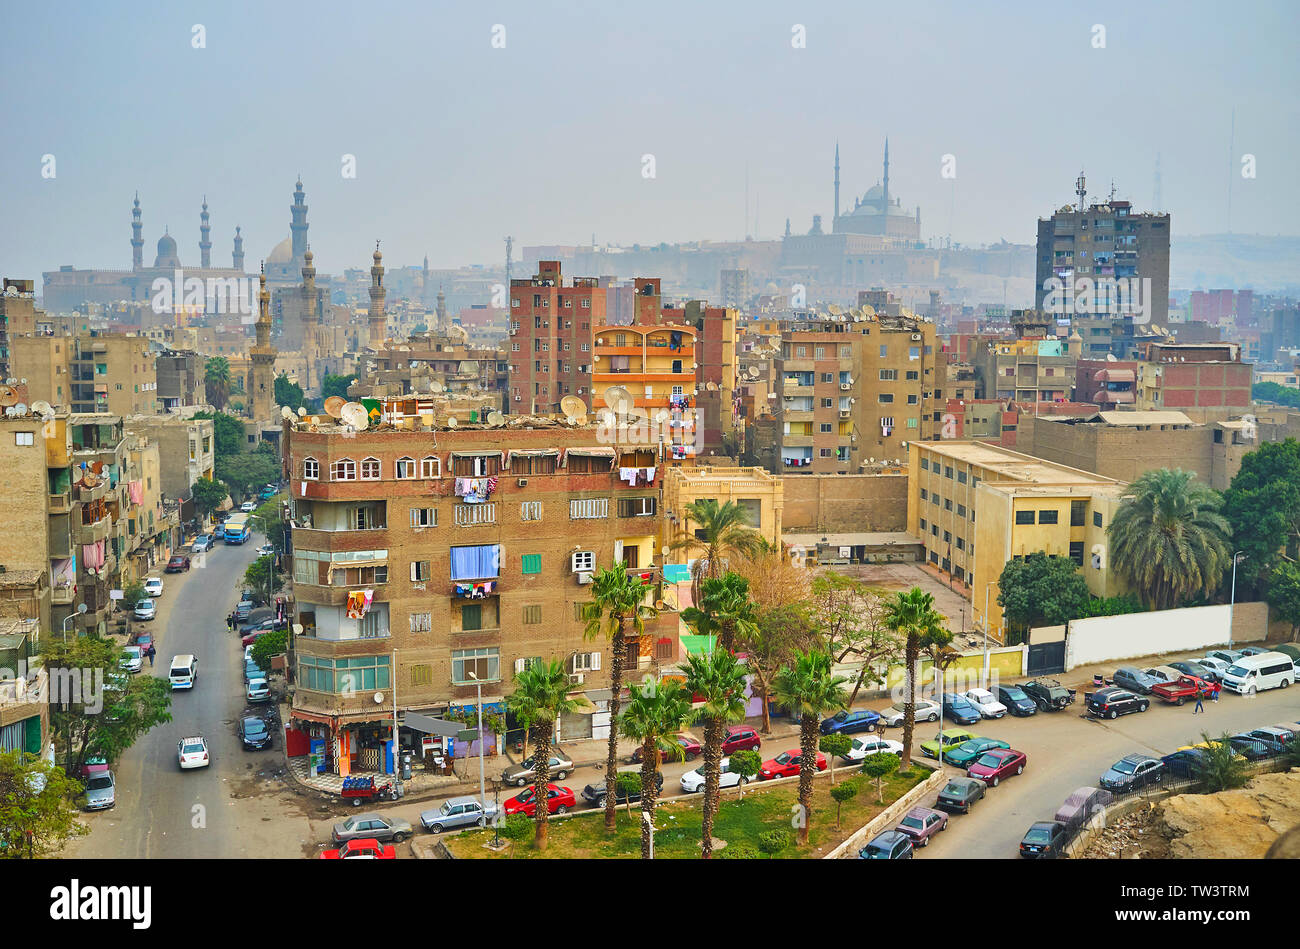 The minarets of Al-Rifai, Sultan Hassan mosques and the Alabaster mosque of Cairo Citadel are seen behind the dusty high-rises of Al Sayeda Zeinab dis Stock Photo